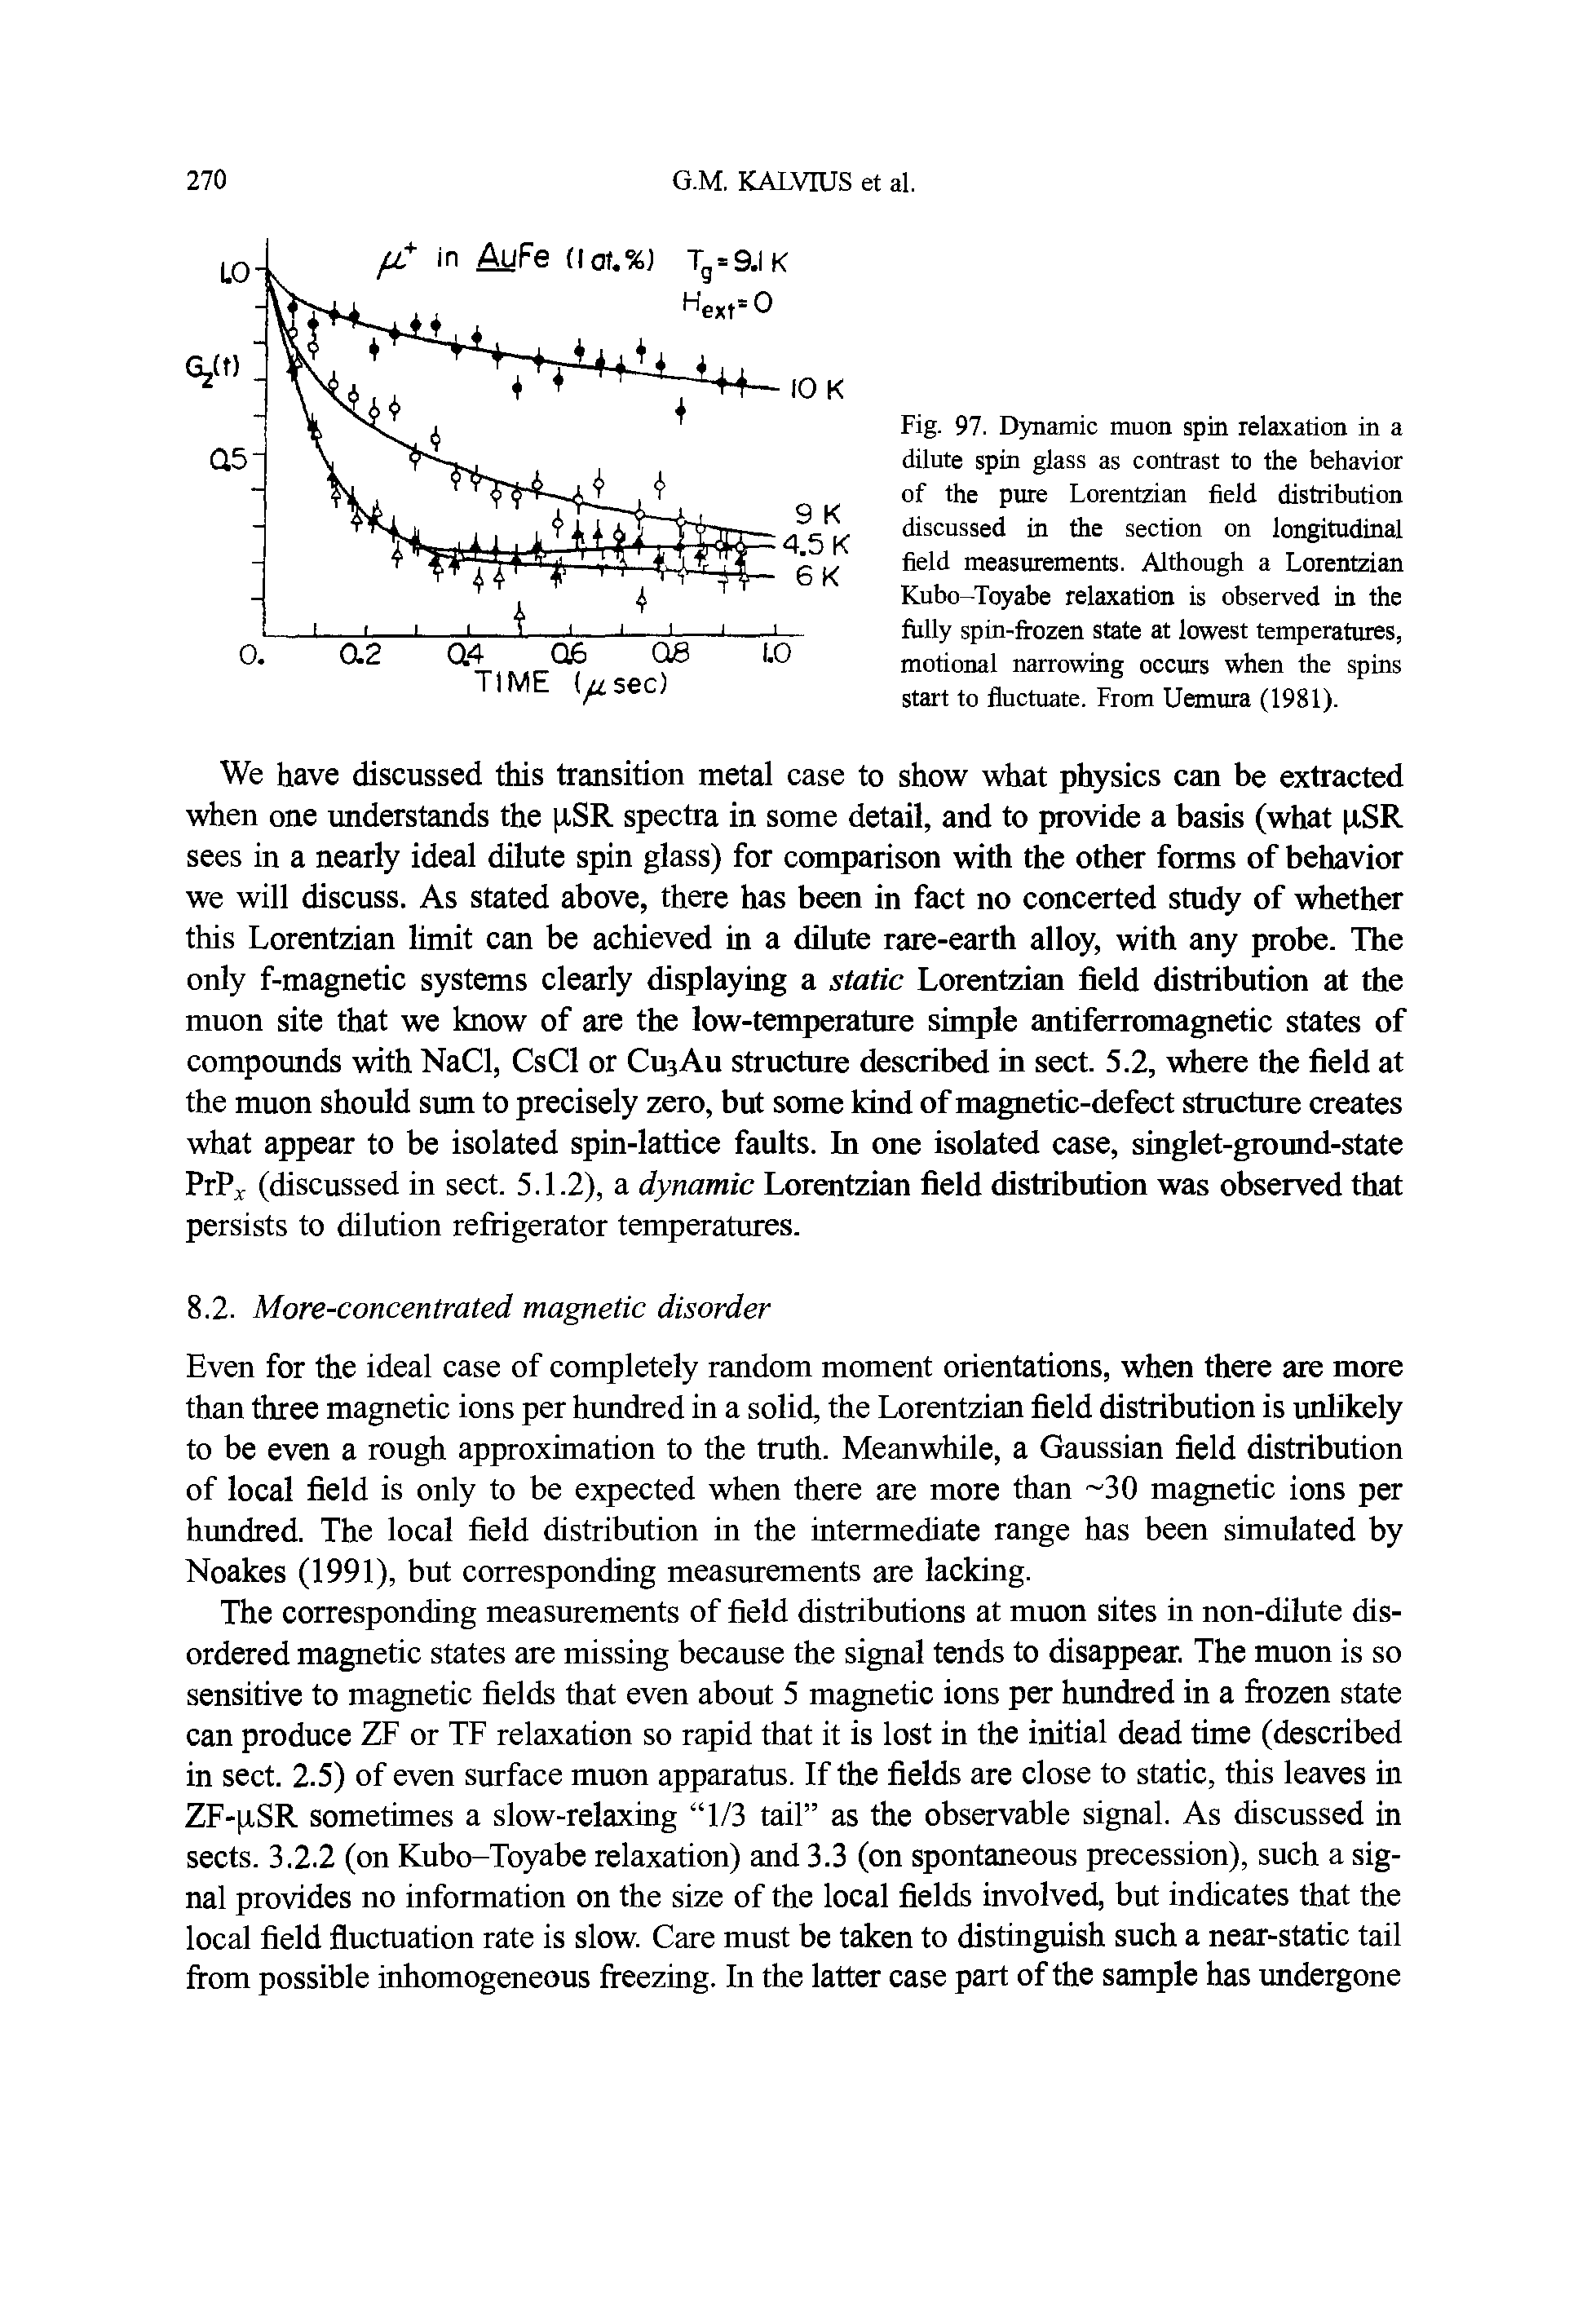 Fig. 97. Dynamic muon spin relaxation in a dilute spin glass as contrast to the behavior of the pure Lorentzian field distribution discussed in the section on longitudinal field measurements. Although a Lorentzian Kubo-Toyabe relaxation is observed in the fully spin-frozen state at lowest temperatures, motional narrowing occurs when the spins start to fluctuate. From Uemura (1981).